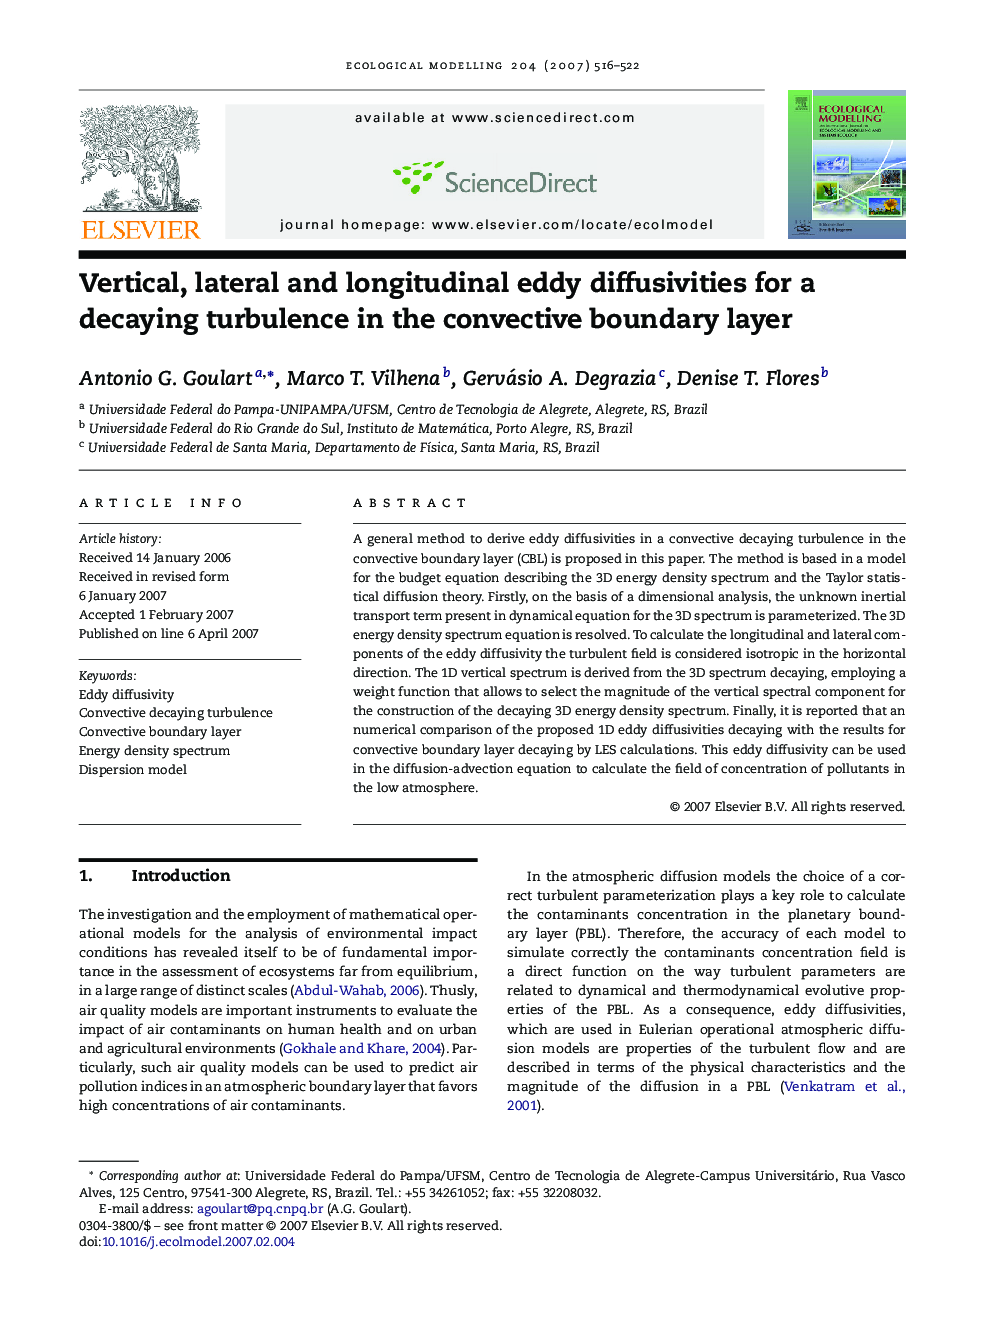 Vertical, lateral and longitudinal eddy diffusivities for a decaying turbulence in the convective boundary layer